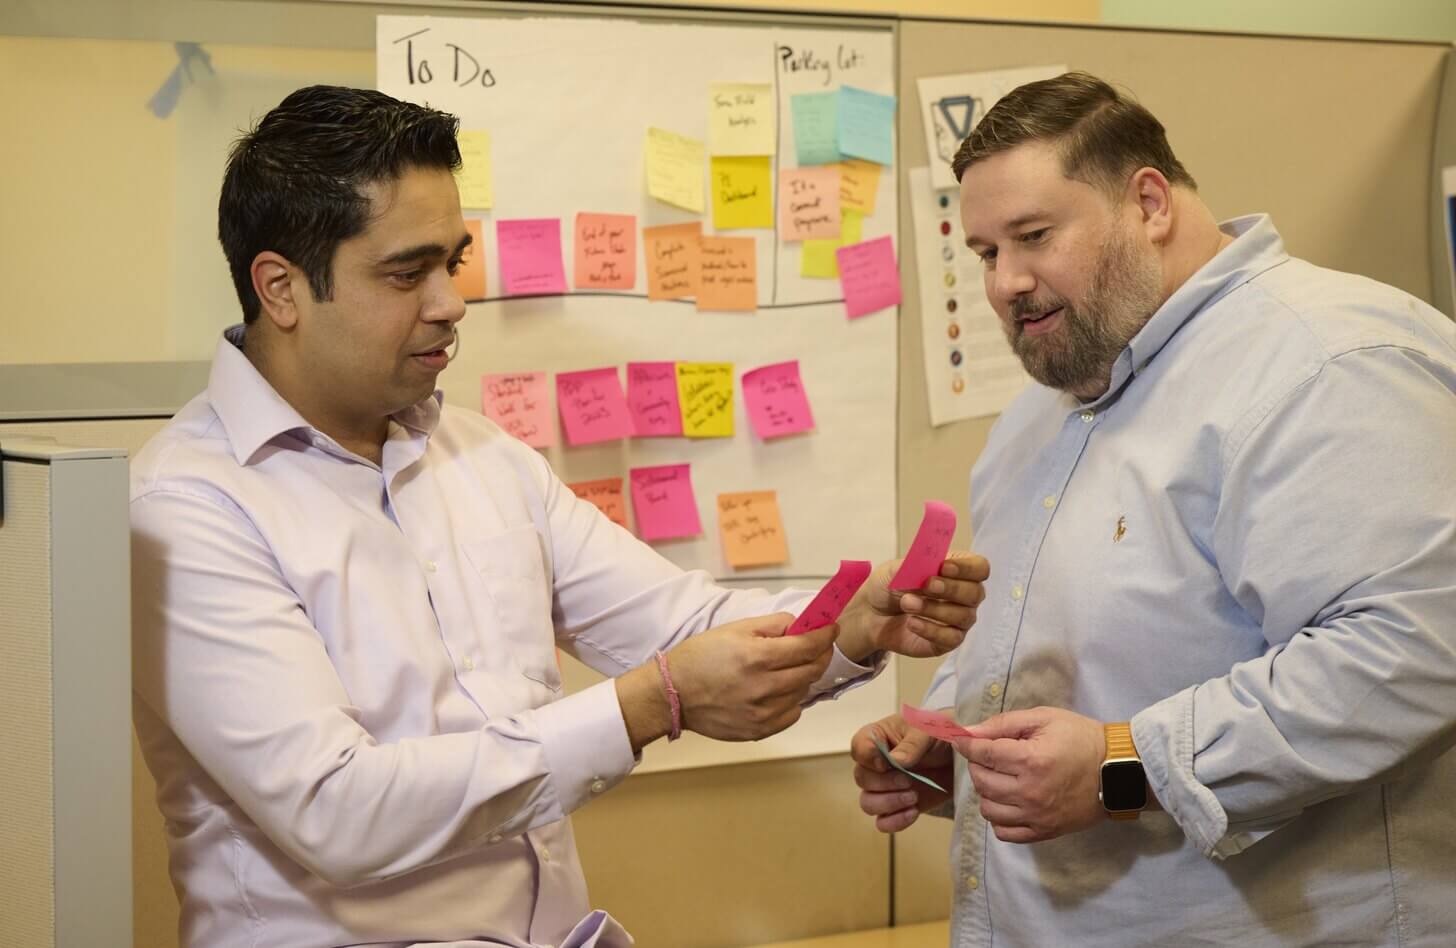 Vikram, a business intelligence employee, works with Louie from the Performance Excellence team to improve processes. Vikram is holding two pink post-it notes.